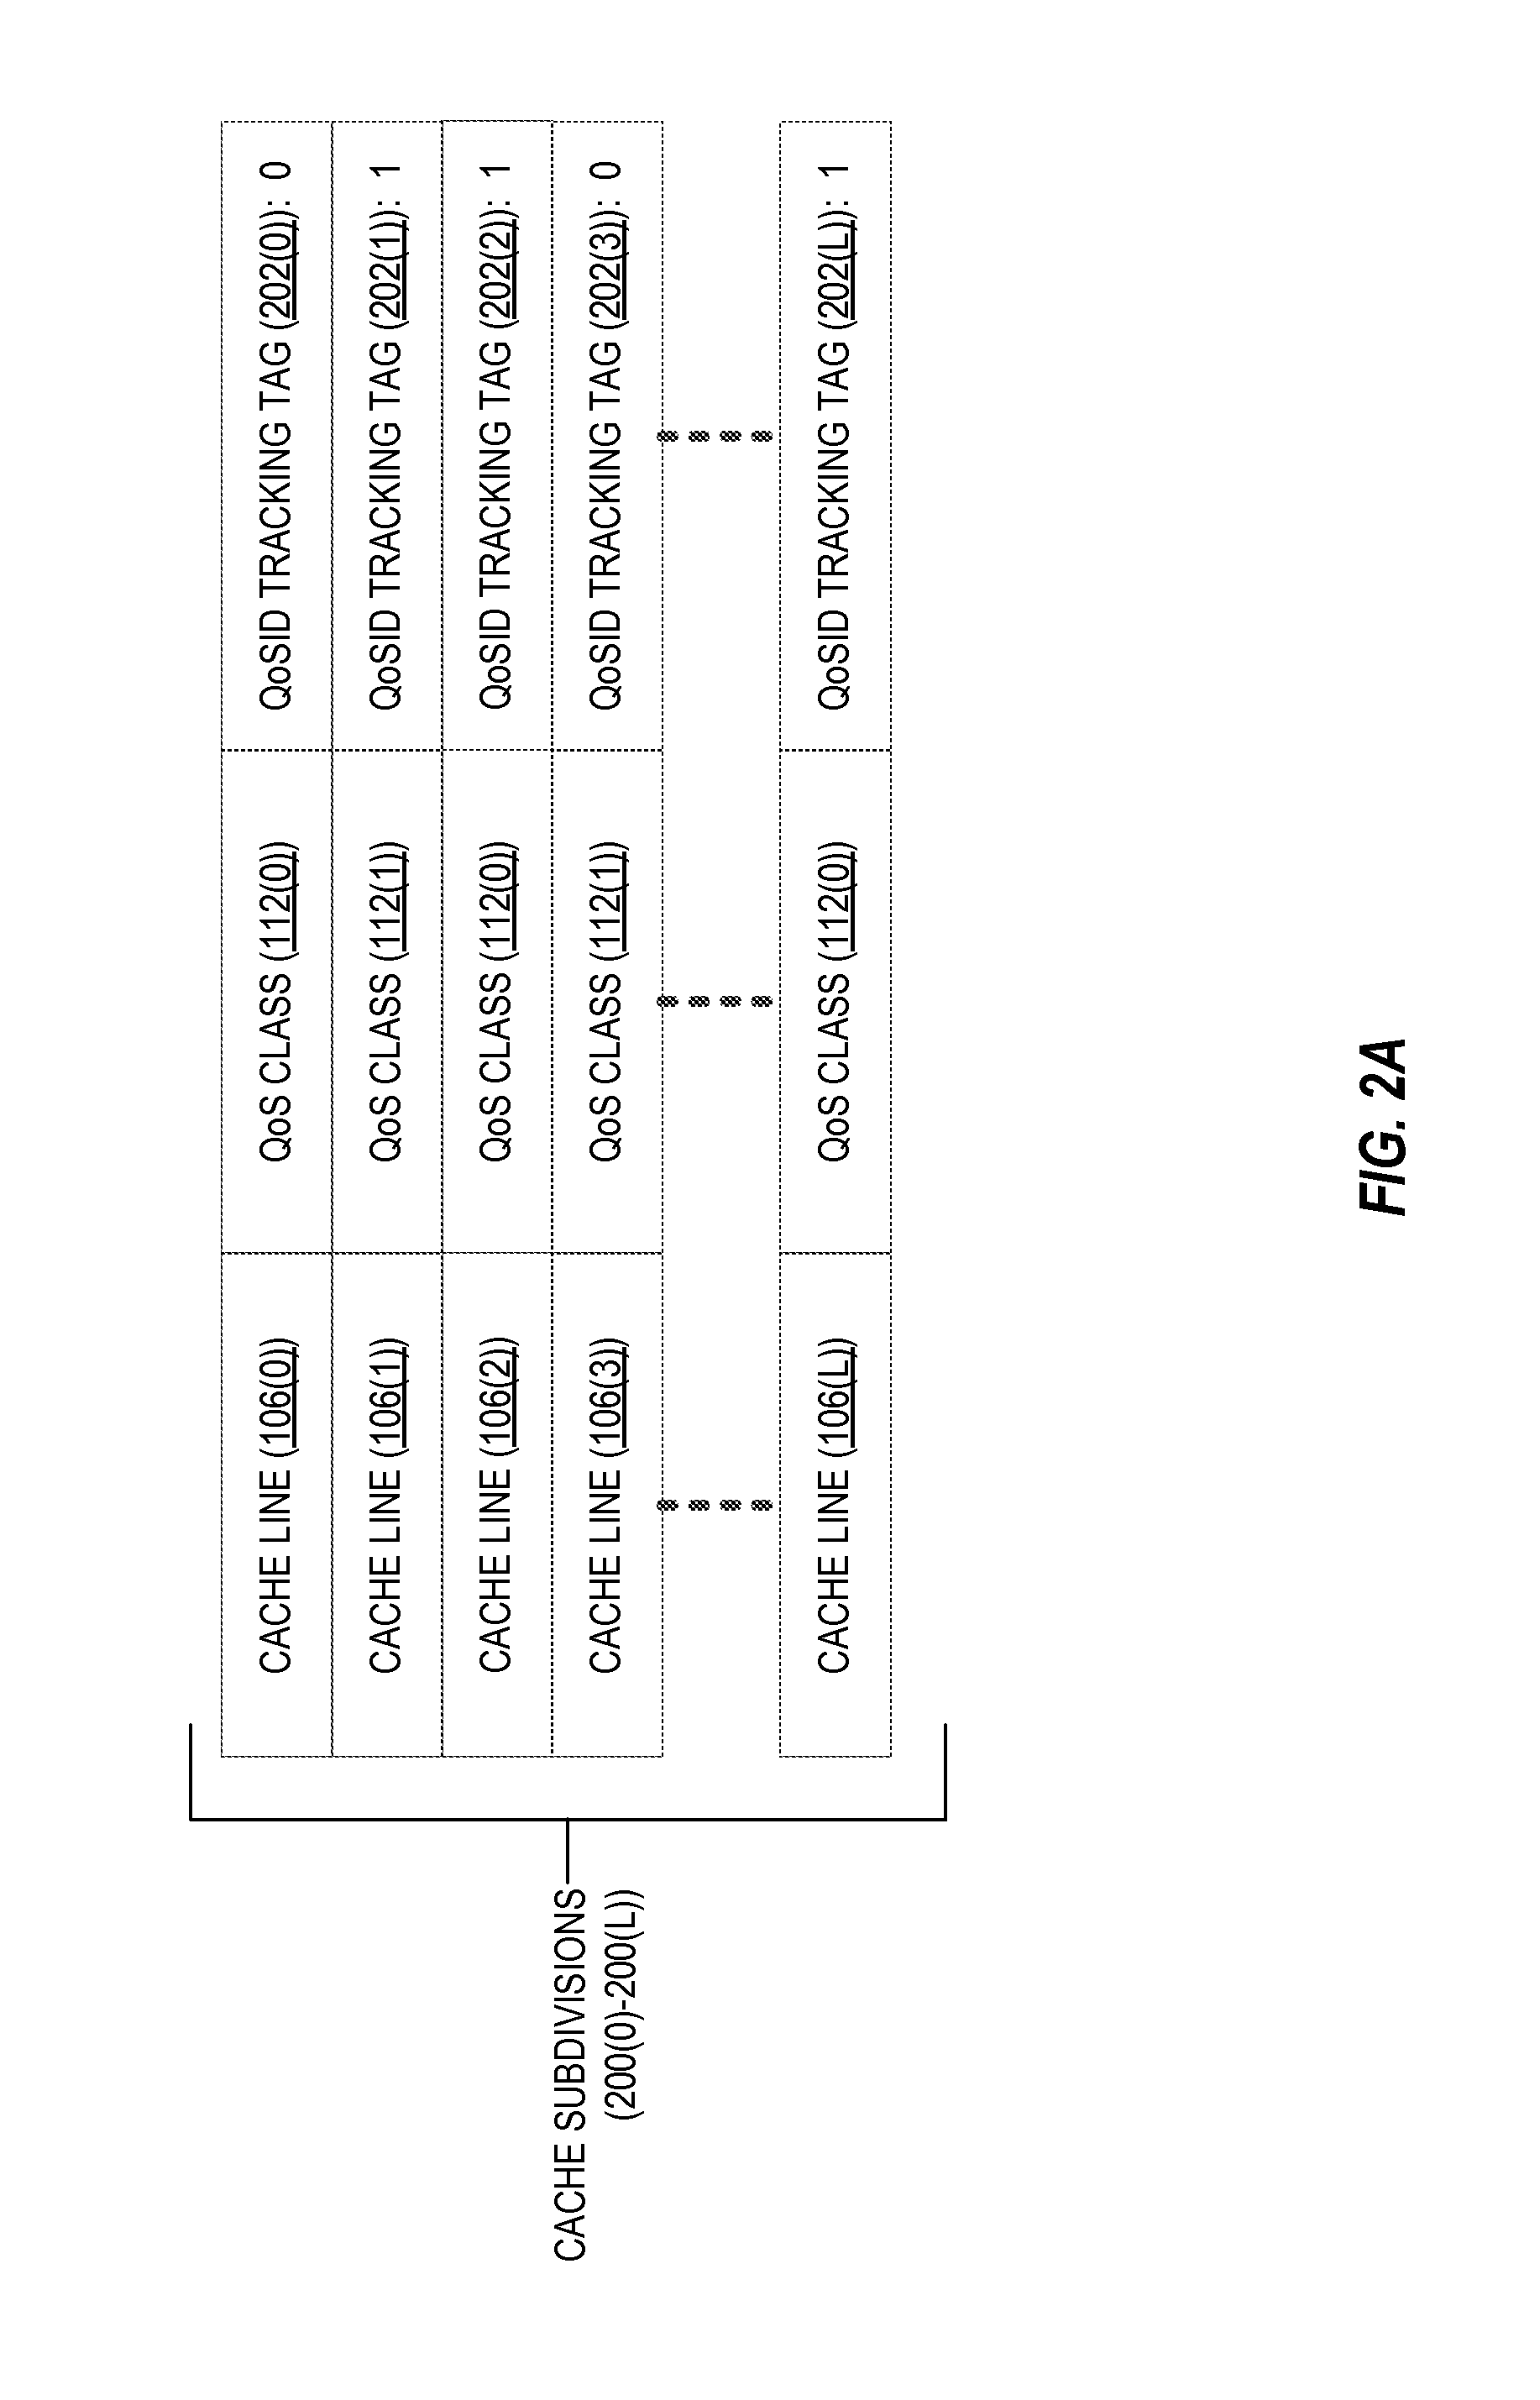 Generating approximate usage measurements for shared cache memory systems